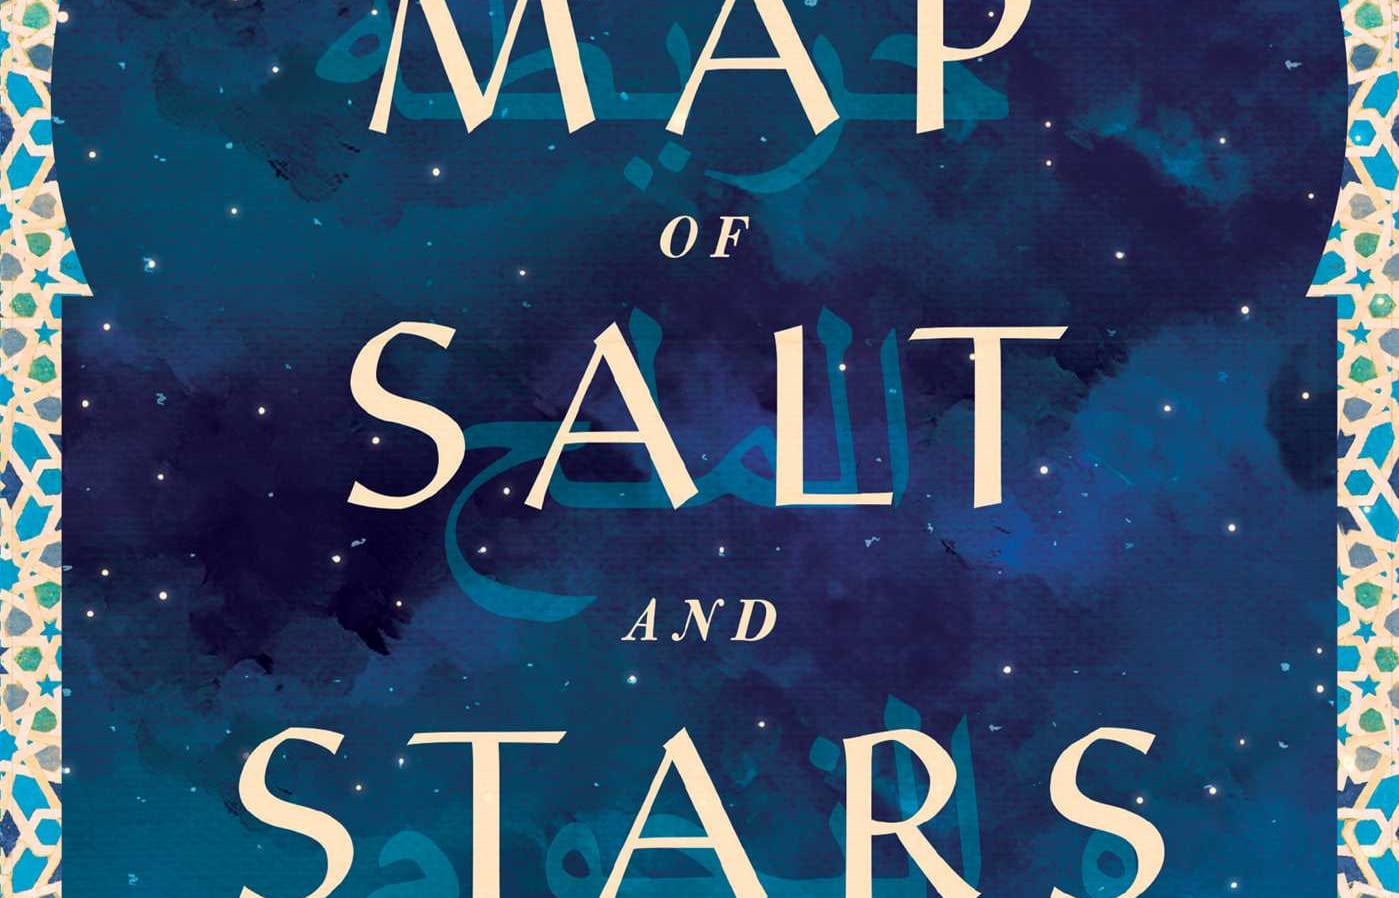 cover of the book "The Map Of Salt And Stars" cover